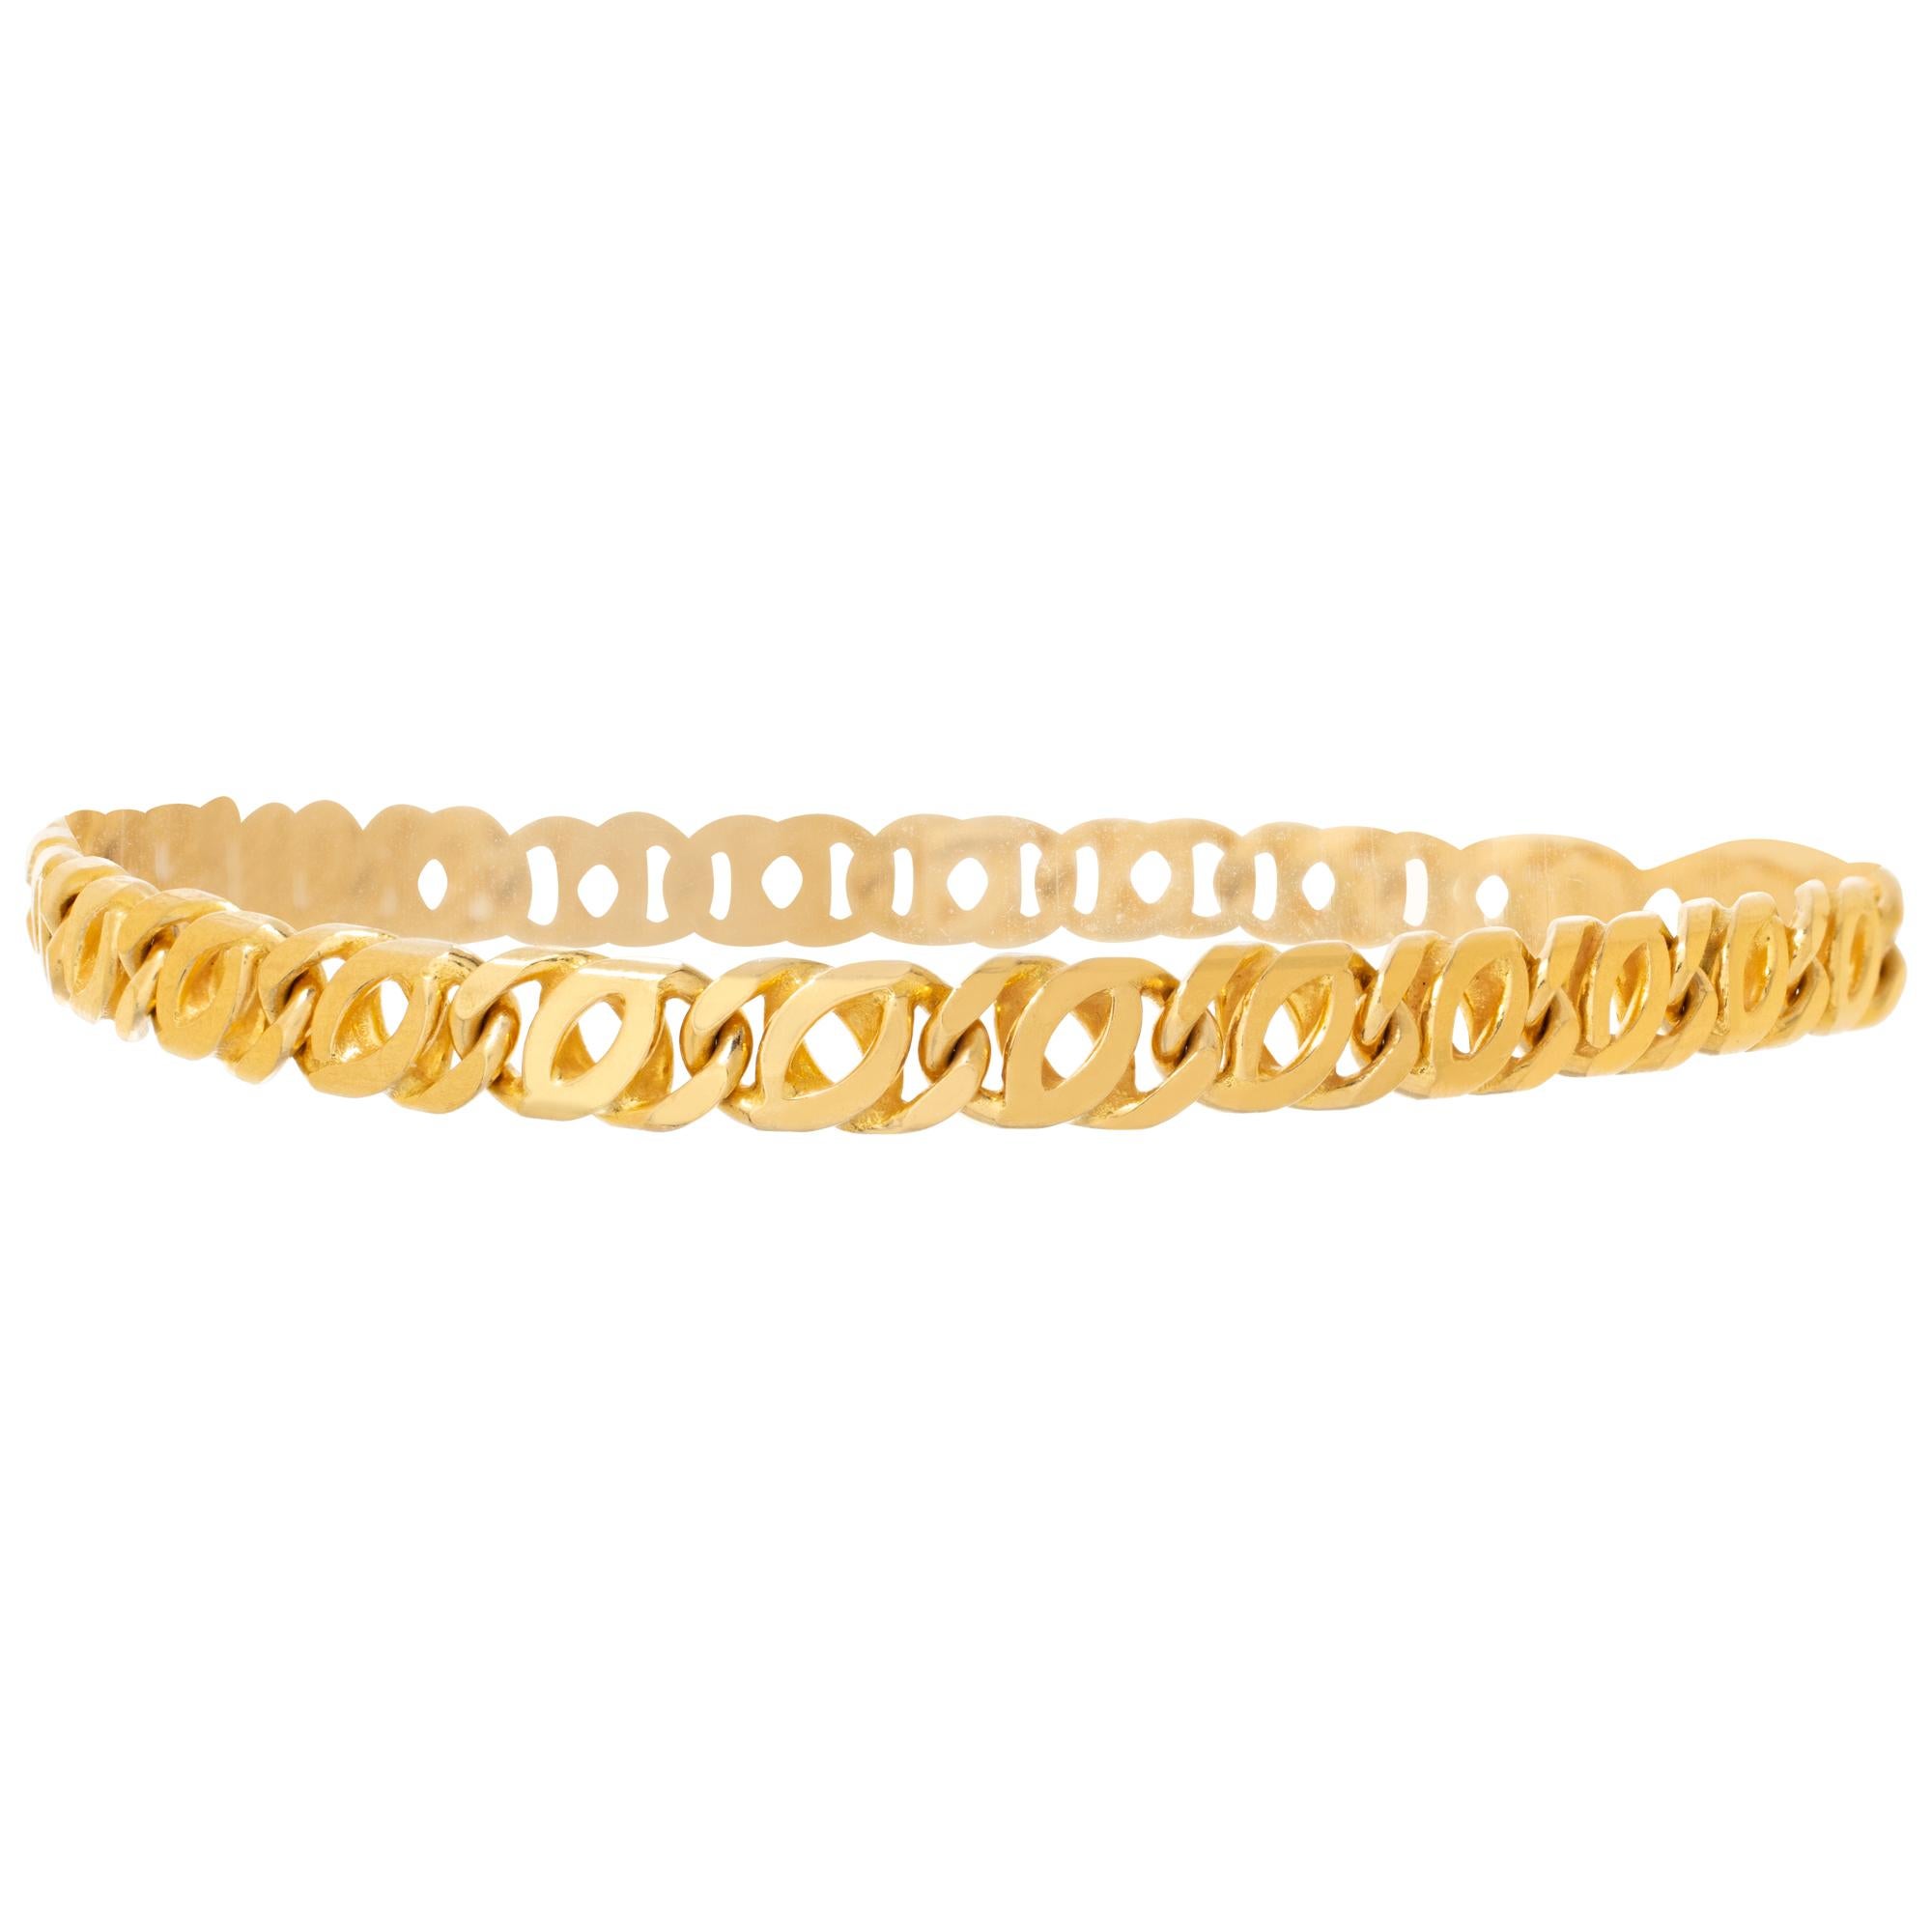 18k yellow gold link bracelet. Fits up to 7.5 inch wrist.